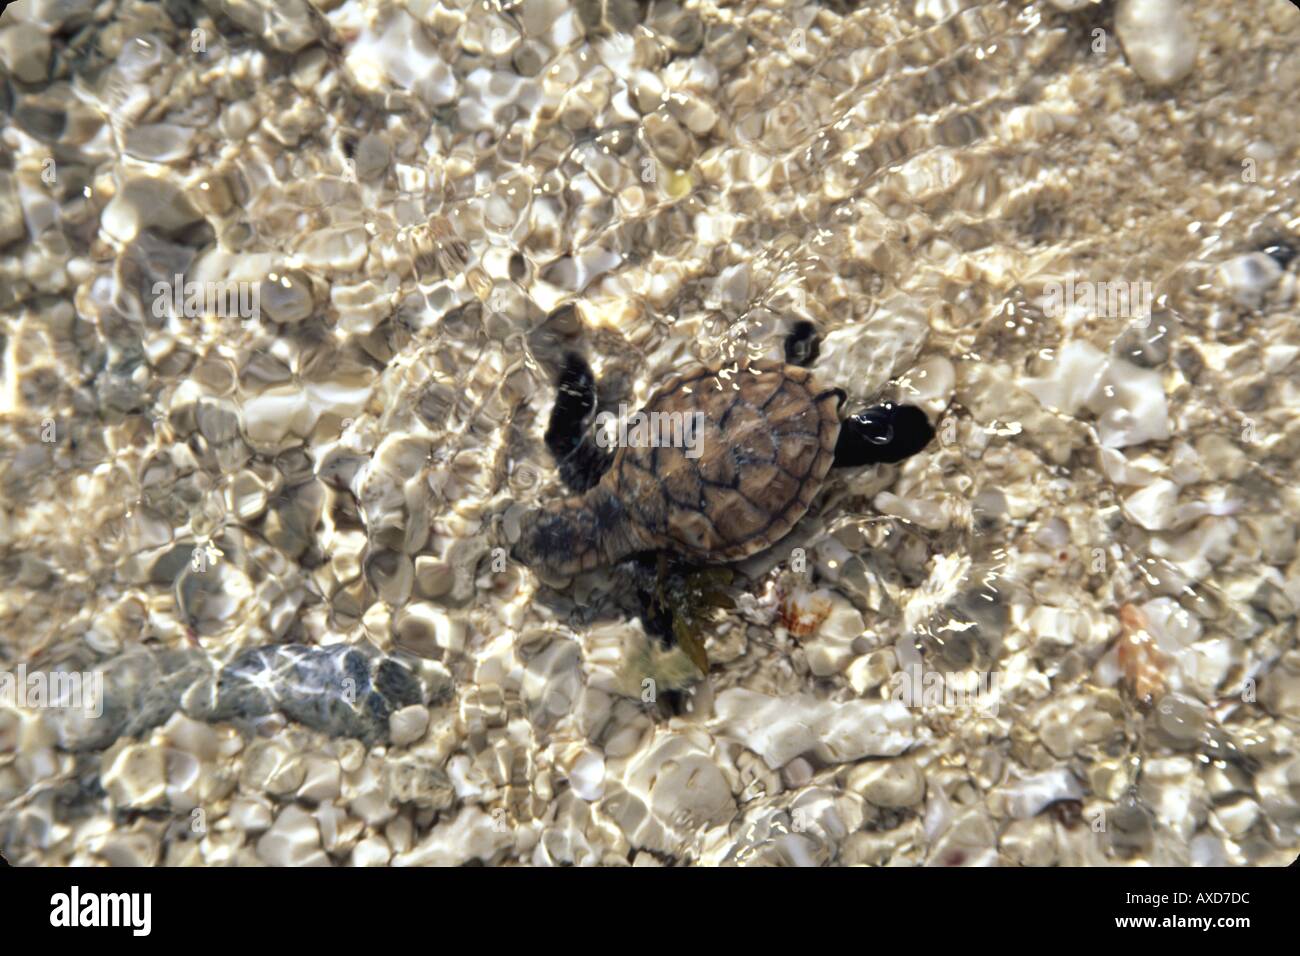 A just hatched Hawksbill turtle Eretmochelys imbricata has just made it across the sand to the ocean Fiji  Stock Photo